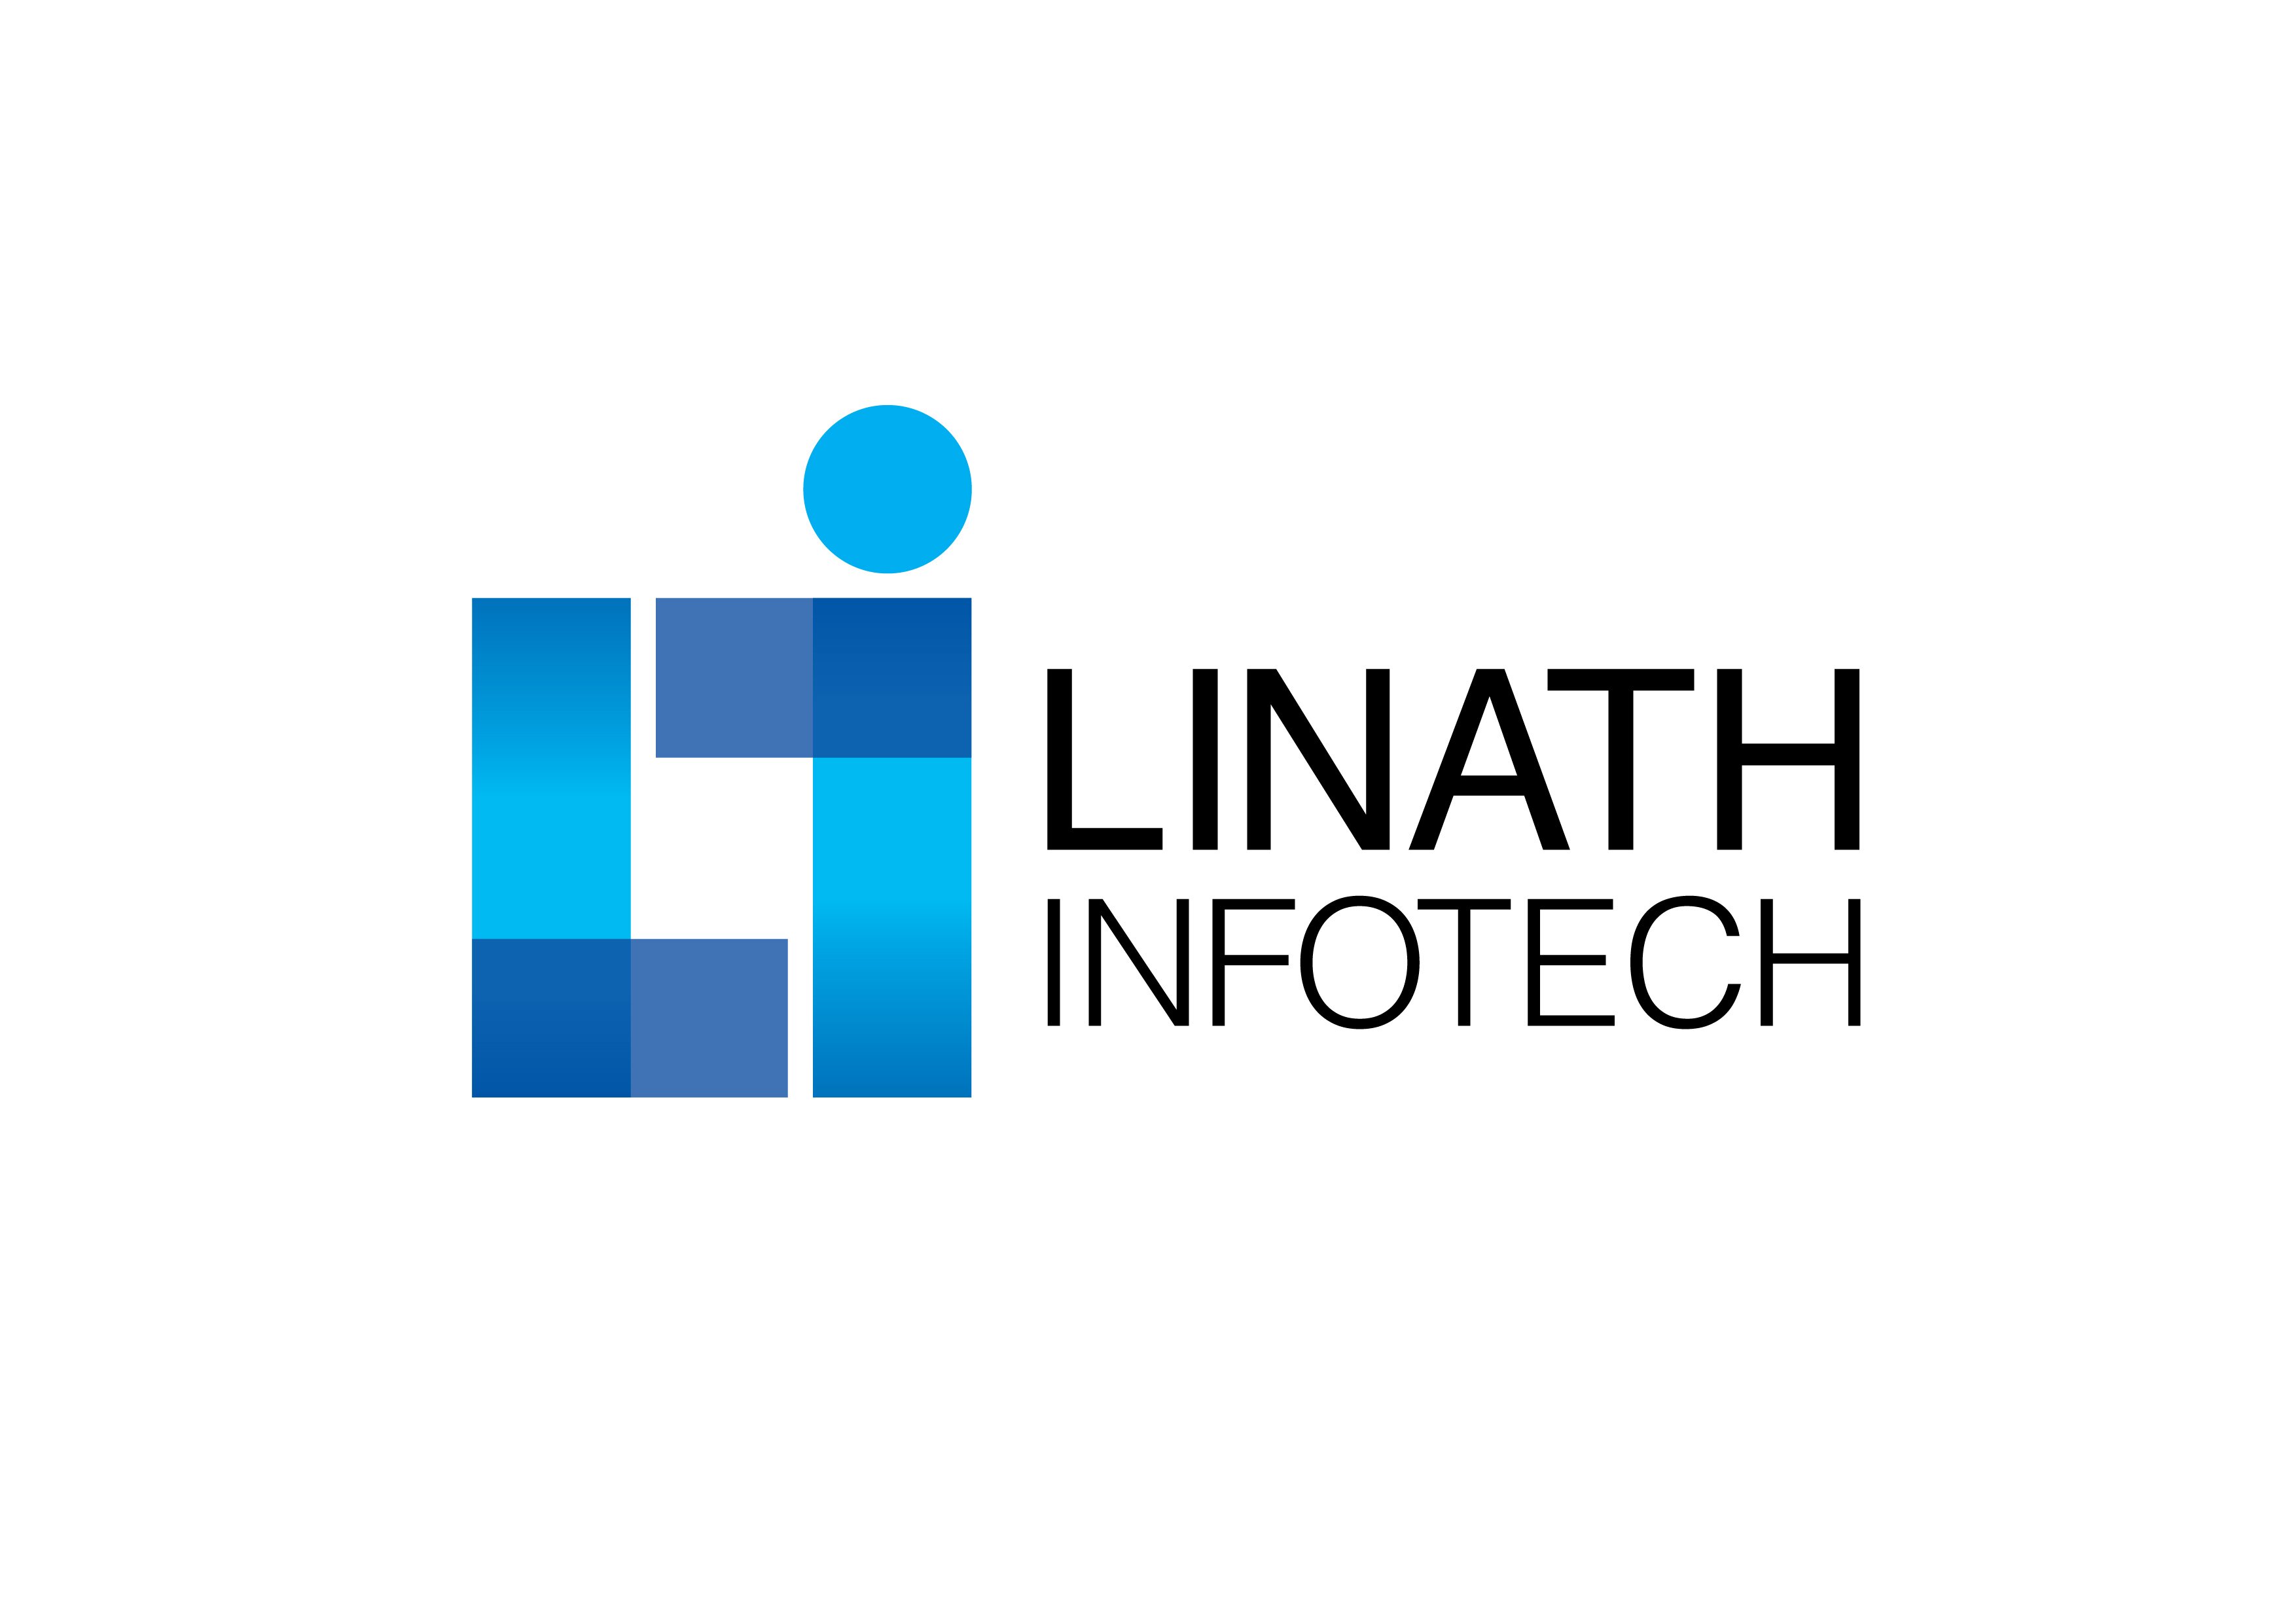 Linath Infotech is an IT Outsourcing company in India which offer all types of IT Services like #SEO, #Webdesign, #eCommerce, #Data Services and many more.